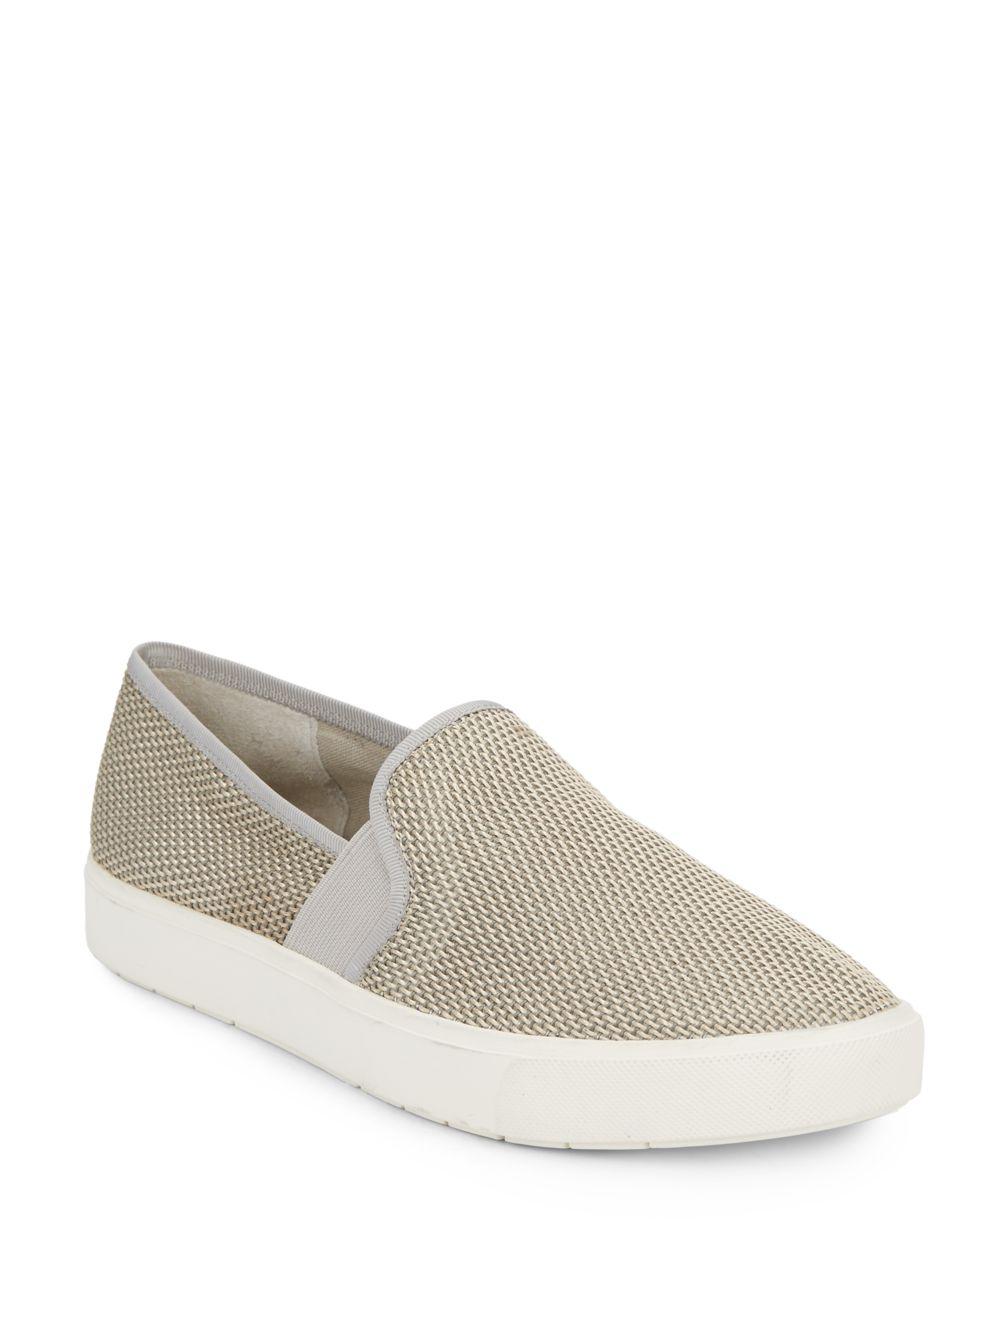 Vince Blair Woven Canvas Slip-on Sneakers in Oyster (Natural) - Lyst